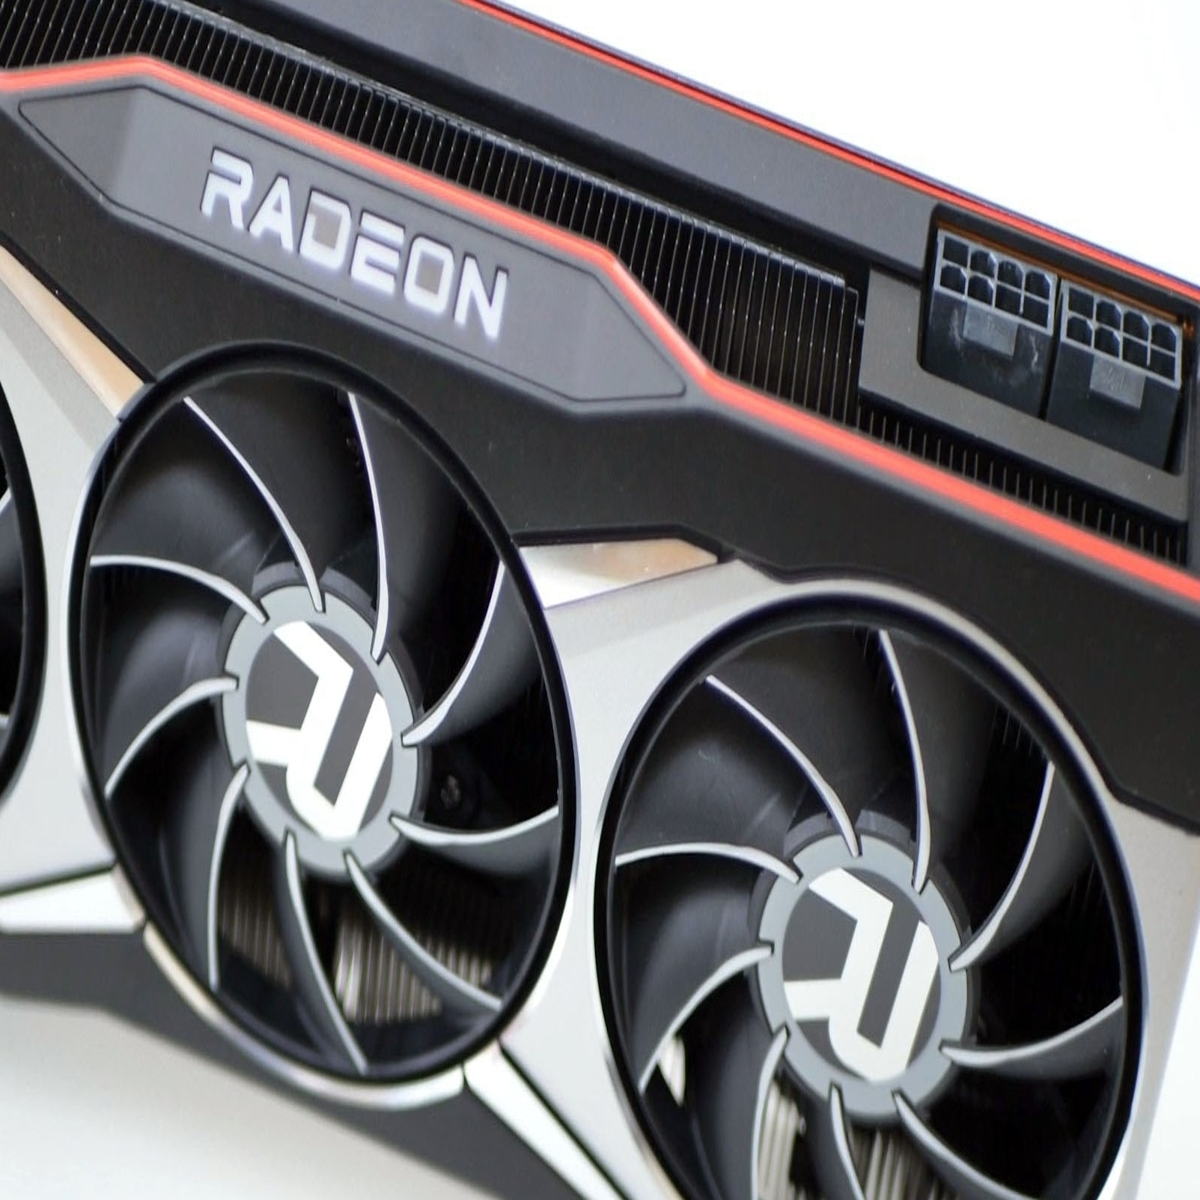 Back on top?! AMD Radeon RX 6800 and RX 6800 XT Review - Feel the same, but  with big differences in detail